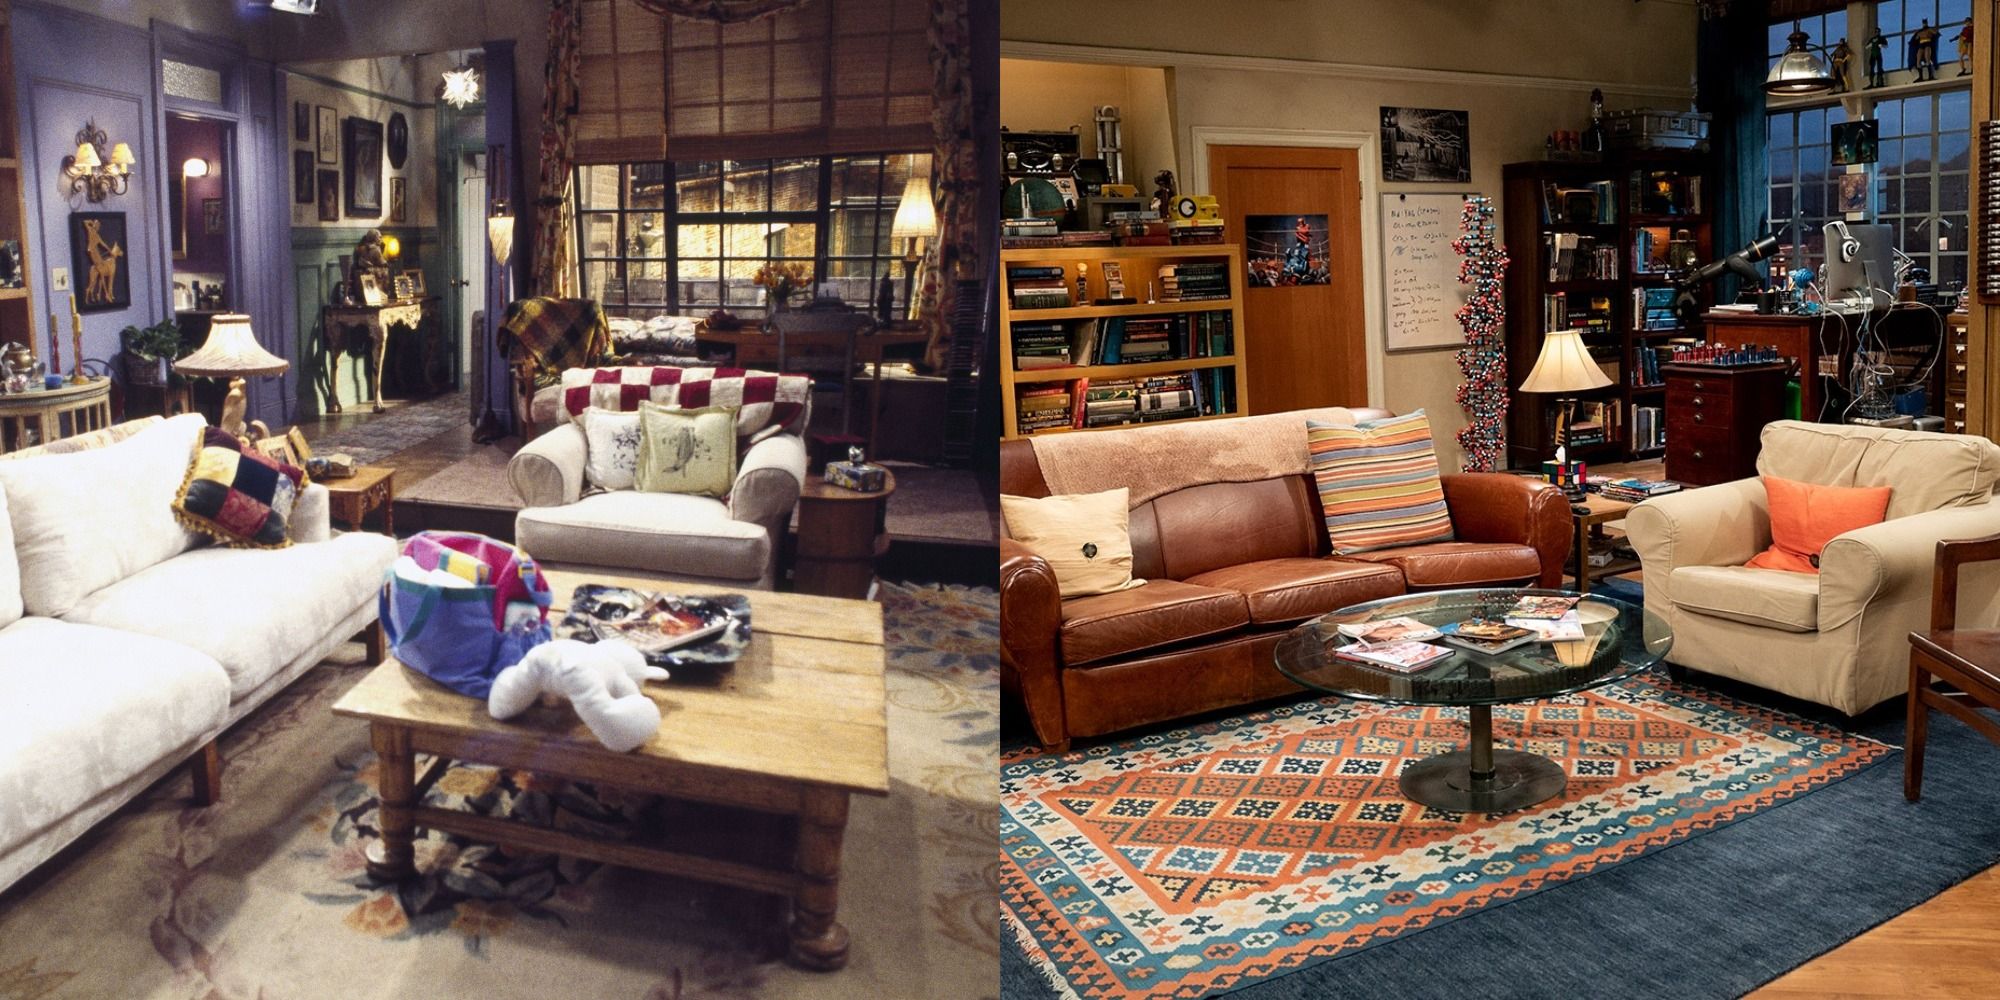 The 10 Coolest Sitcom Apartments Ranked